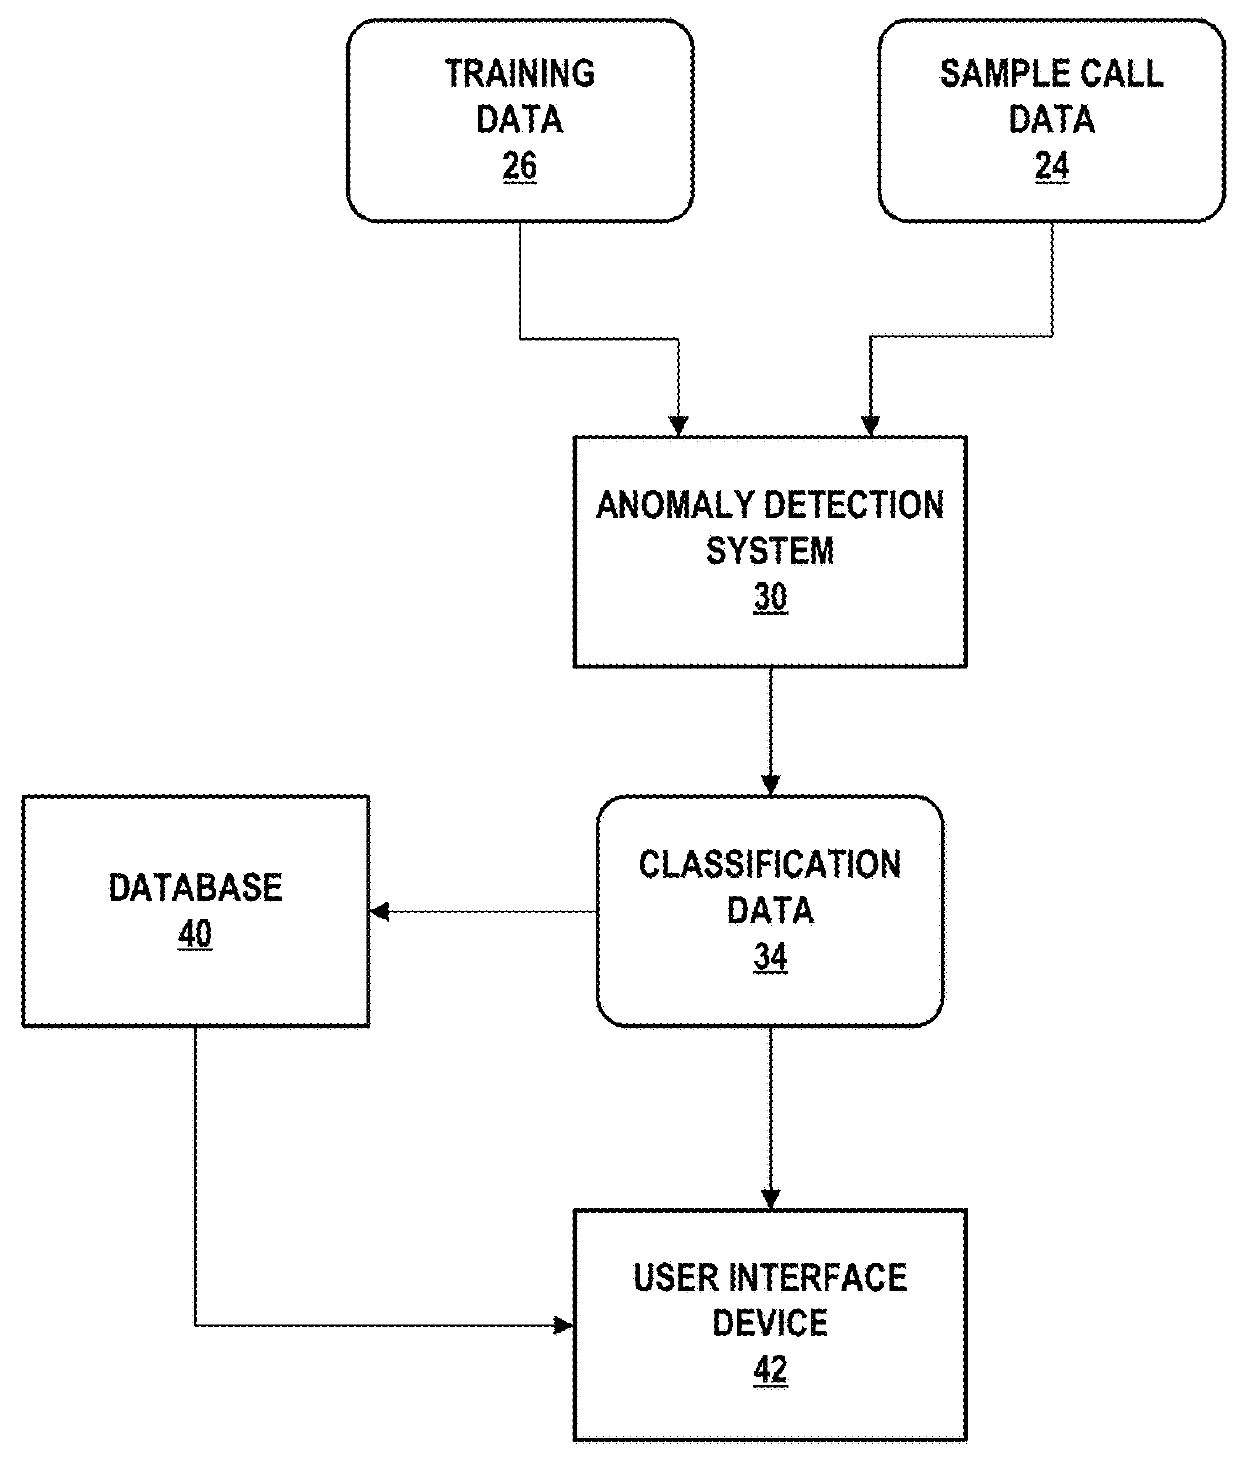 Anomaly detection in streaming telephone network data